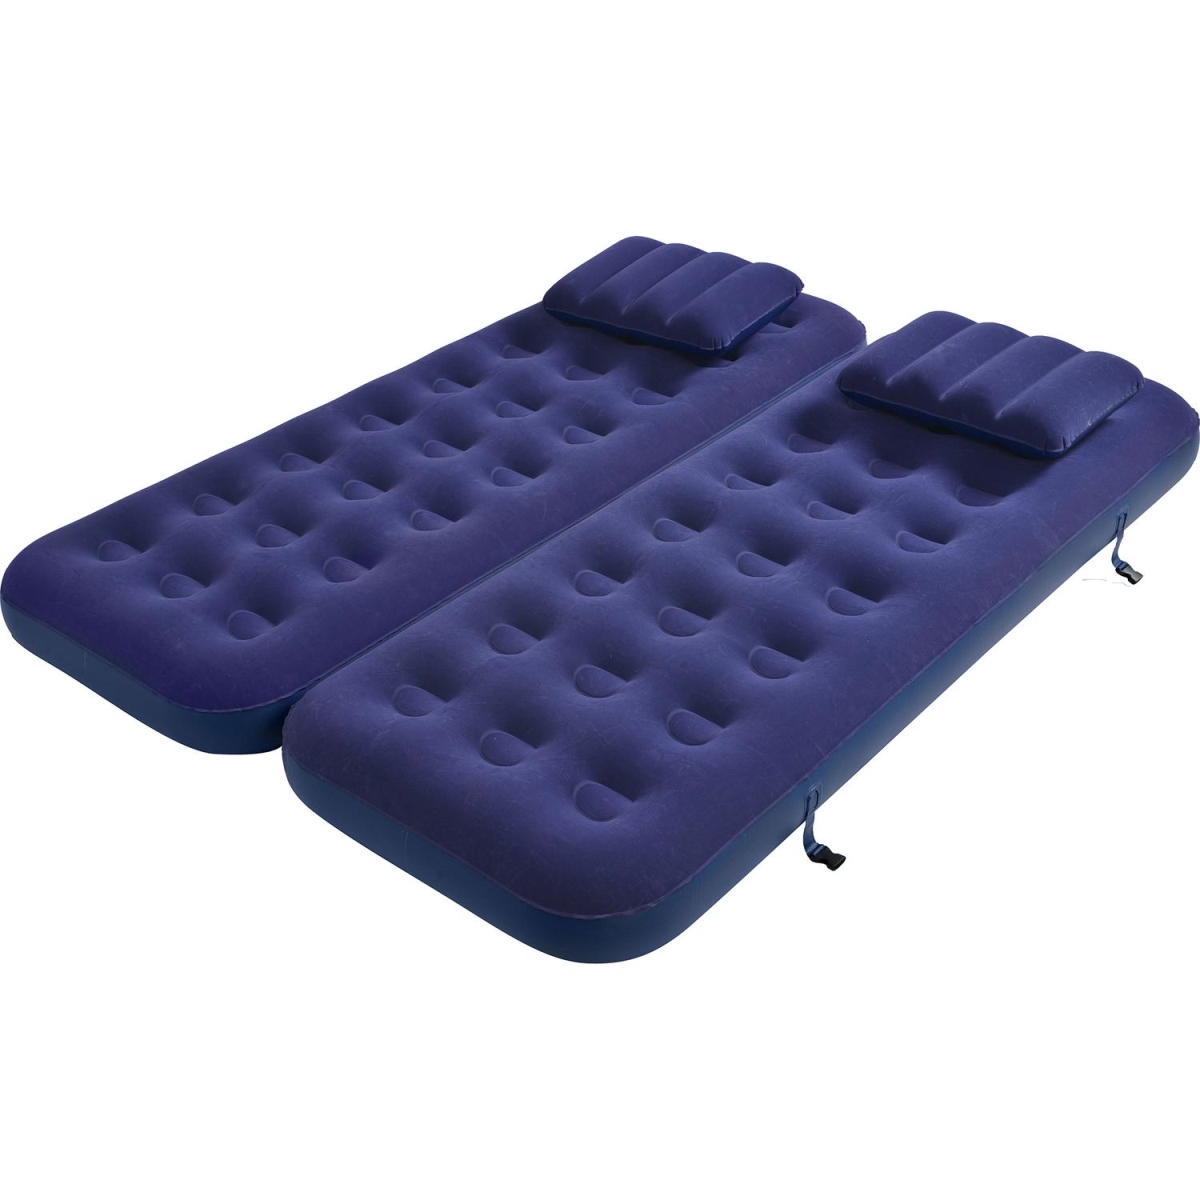 32601998 75 In. Navy Blue 3 In 1 Inflatable Flocked Air Mattress With Pillows